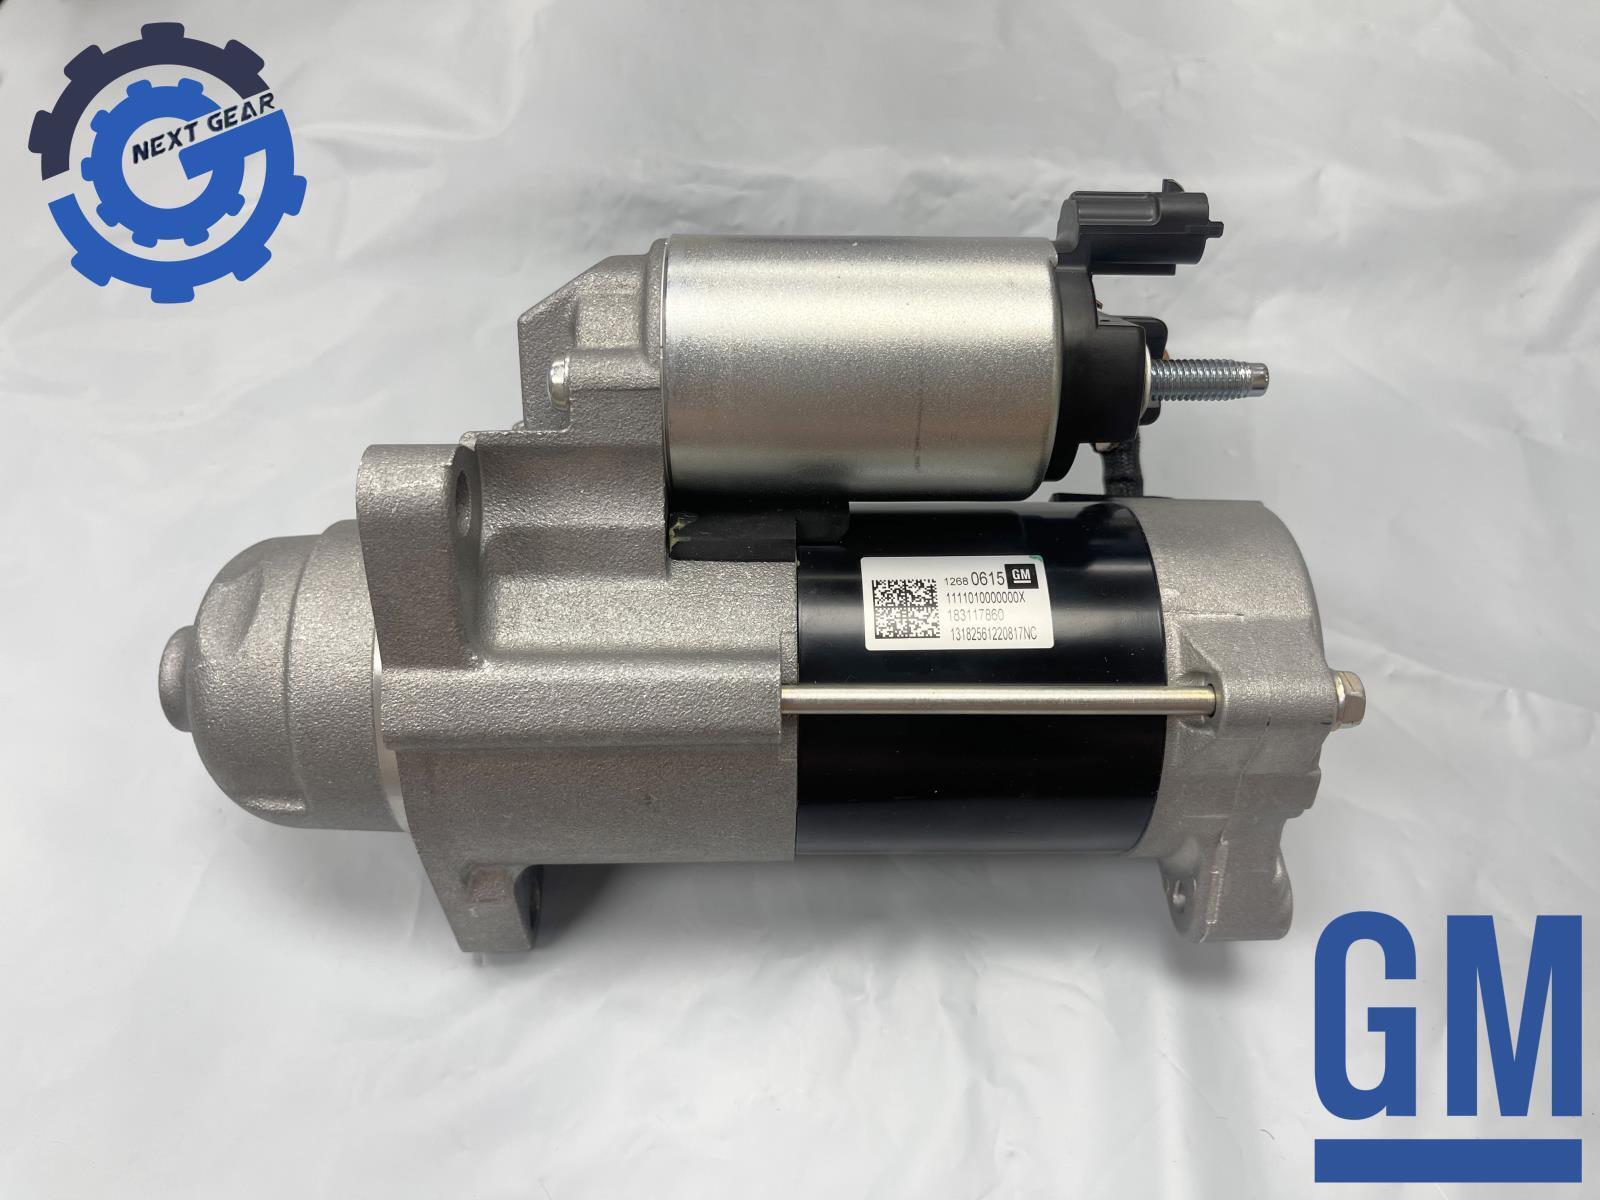 12680615 NEW OEM GM Starter Motor Assembly Fits Buick Chevy GMC 2017-21 12690481